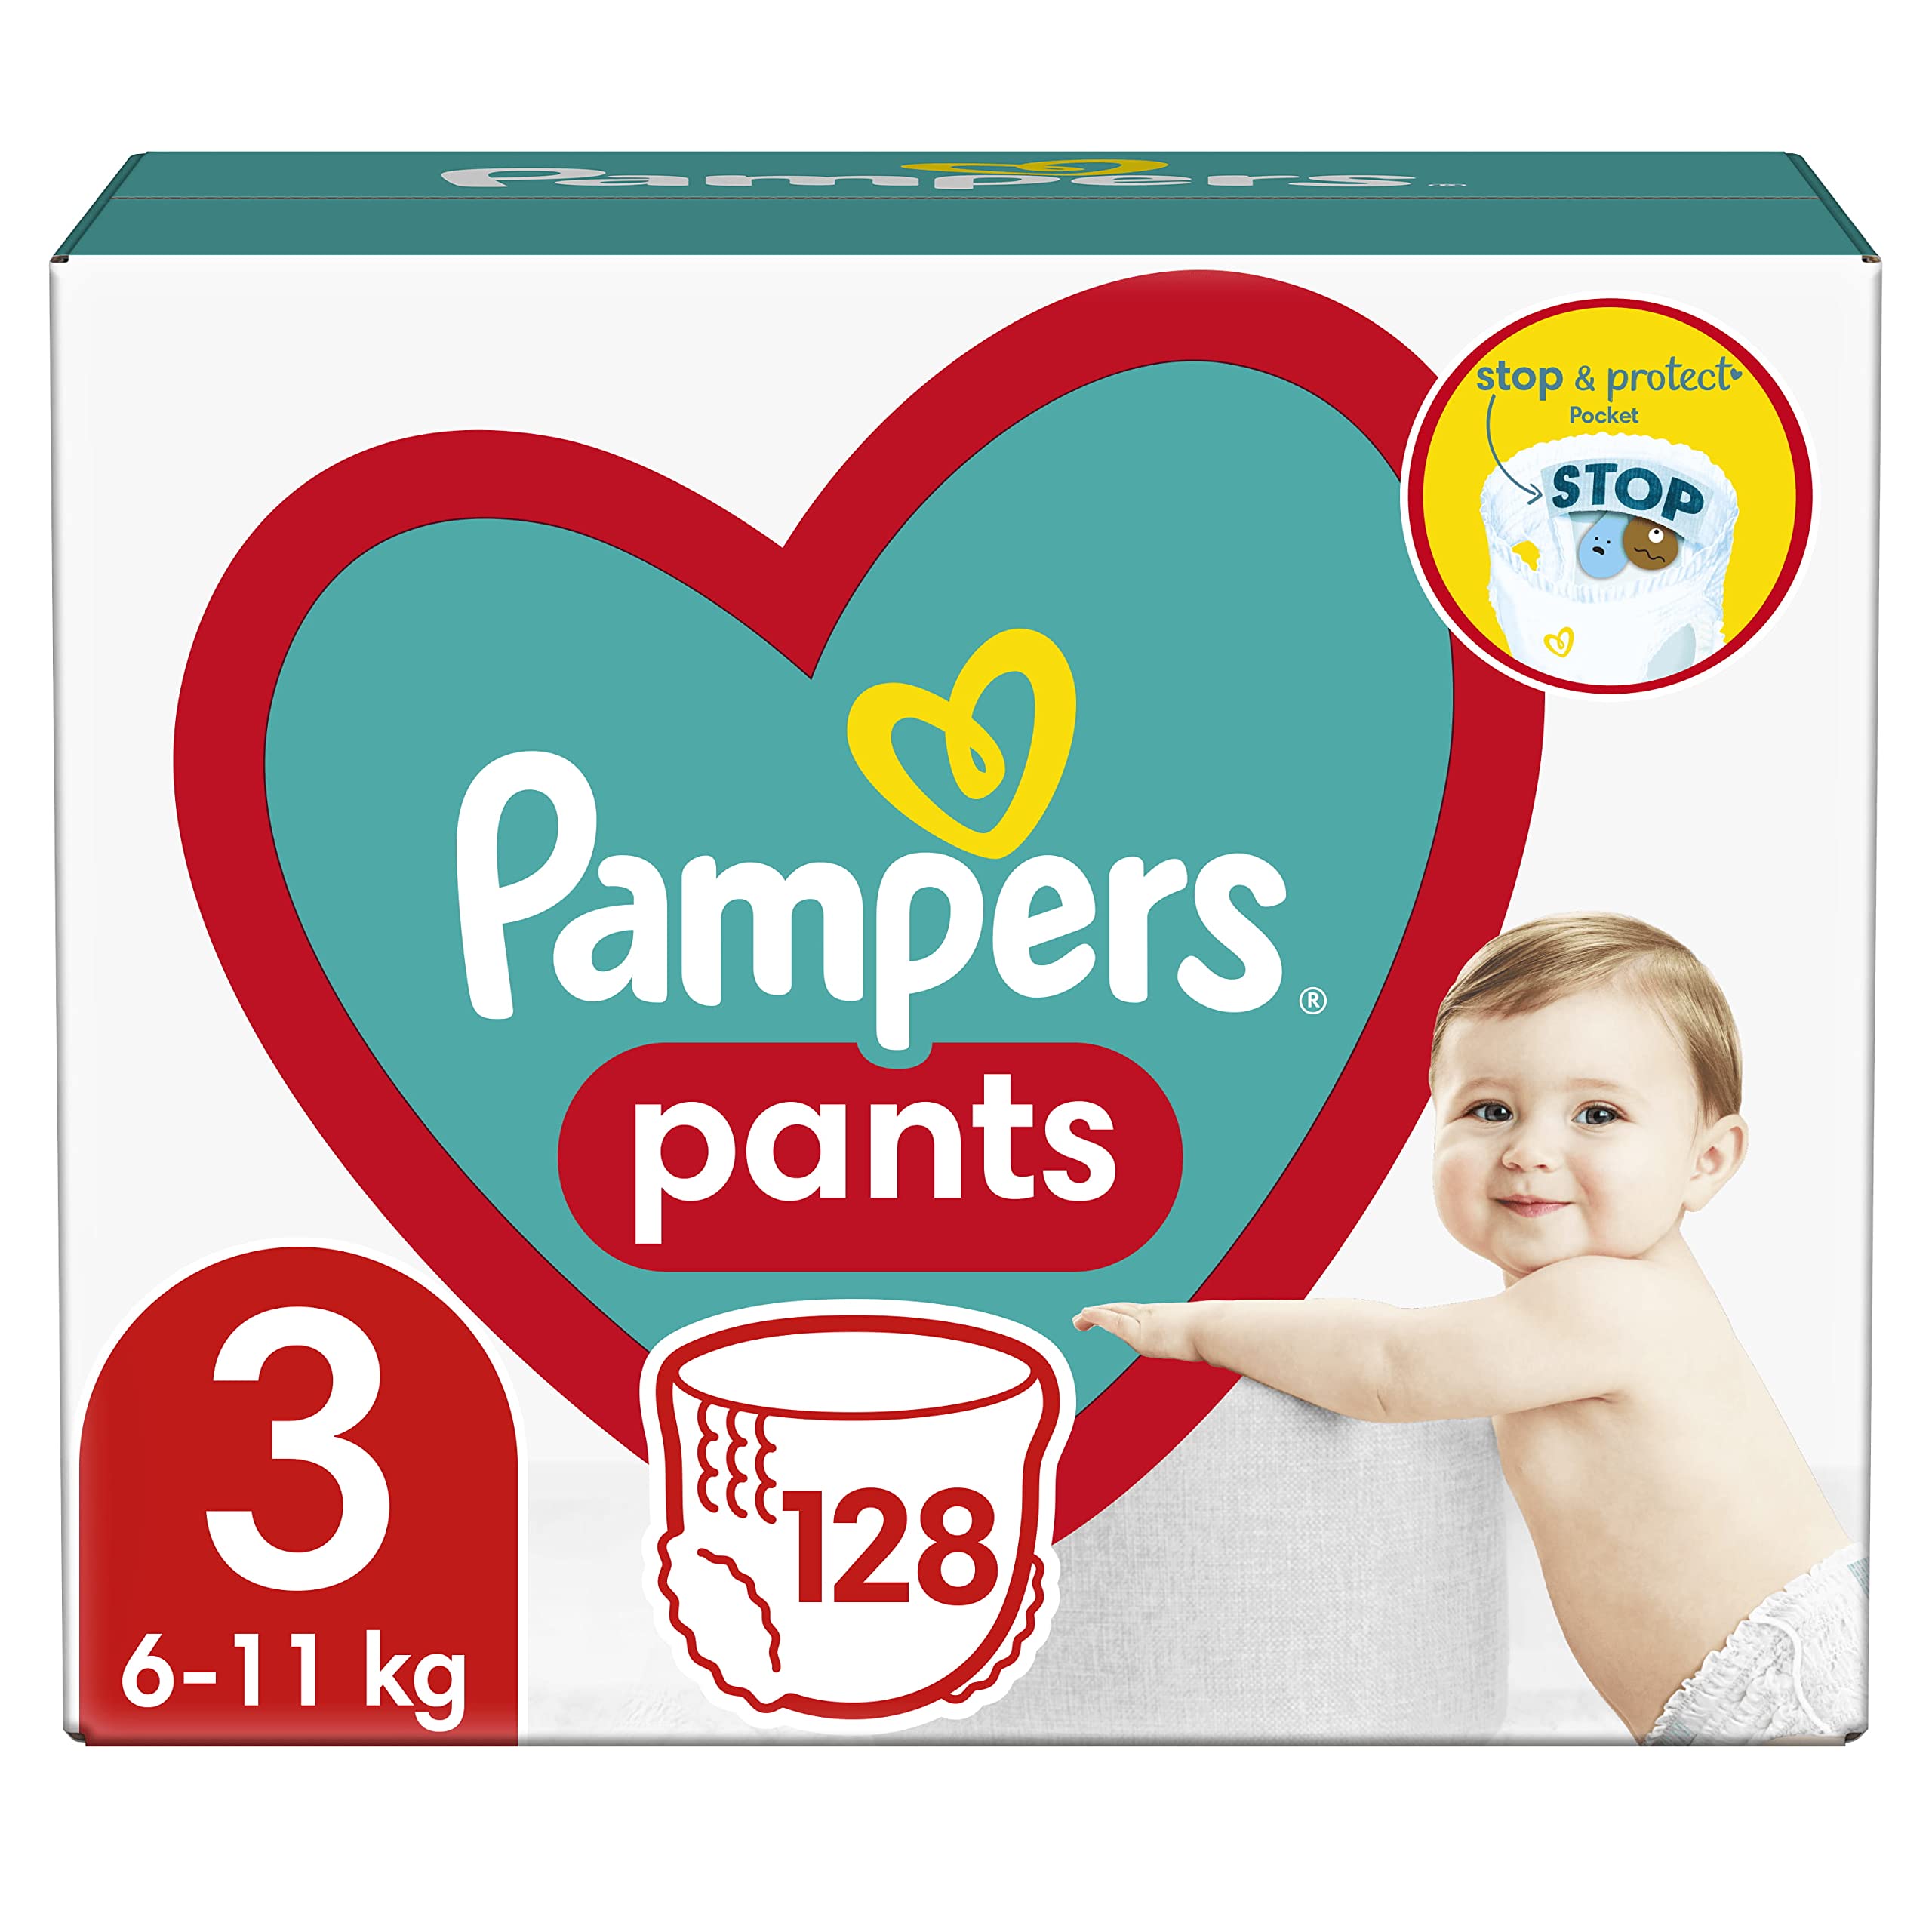 hebe pampers 3